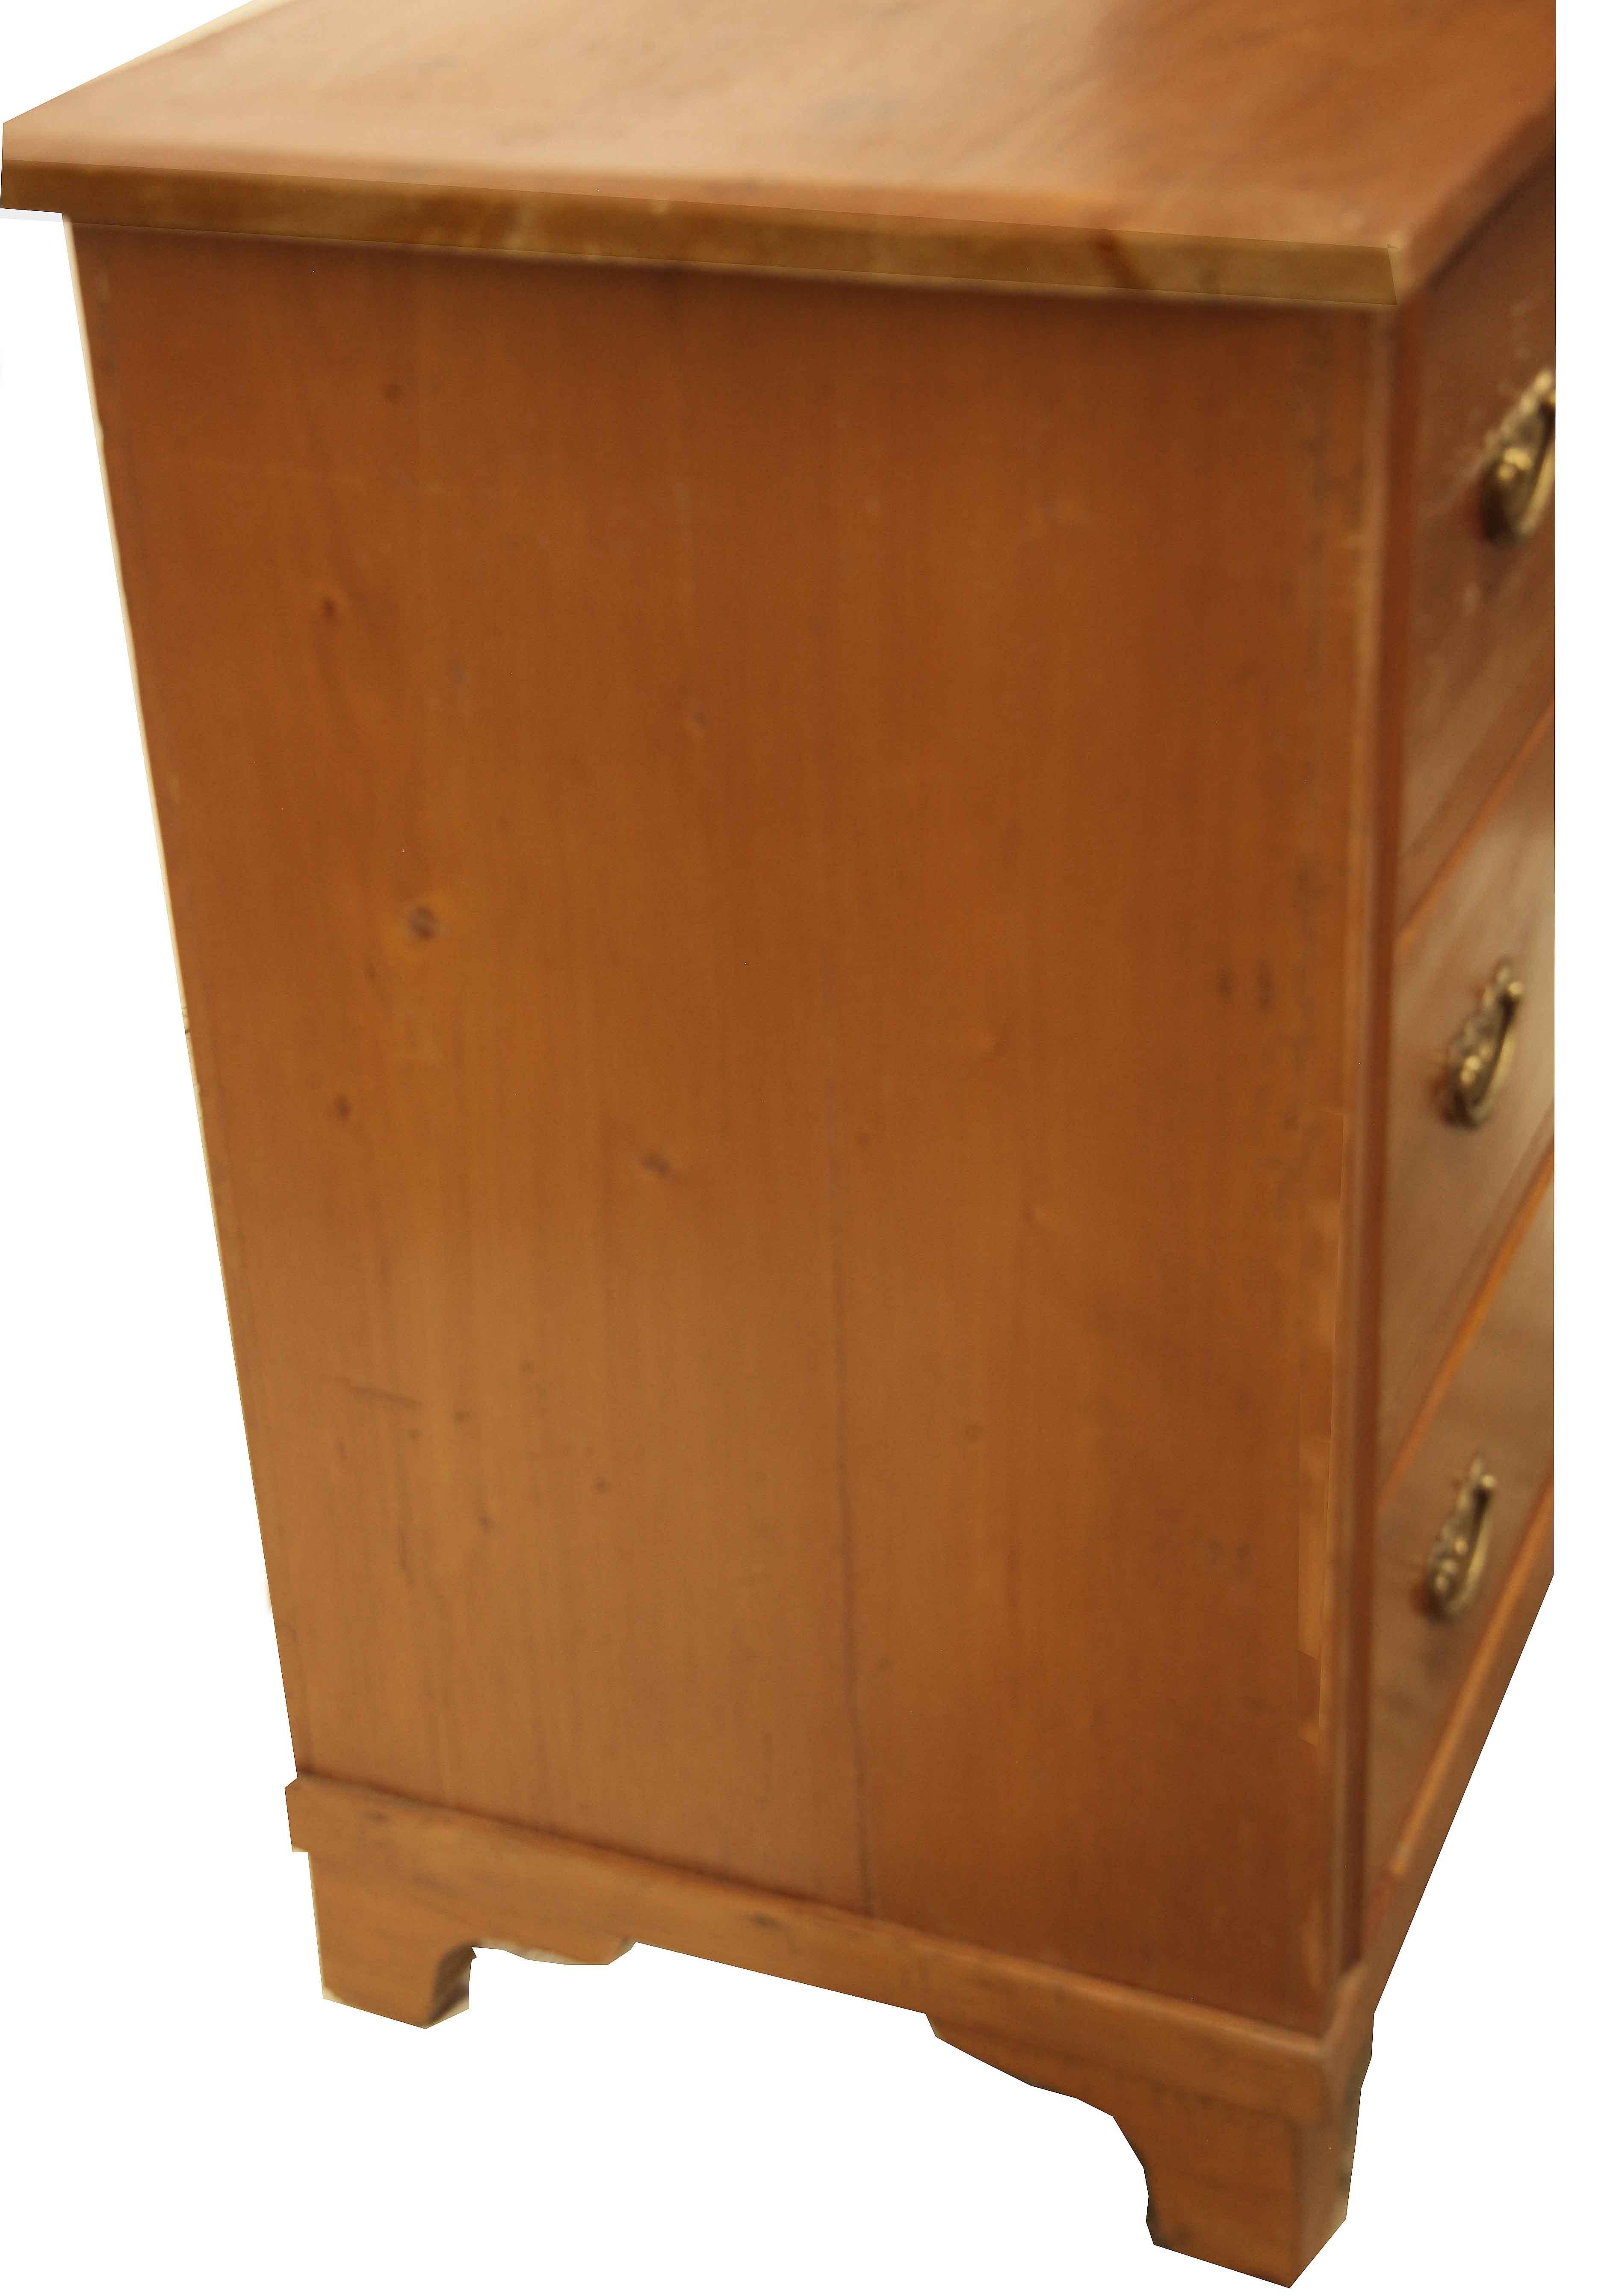 Continental pine three drawer chest, with a pleasant honey color all over, the top has angled front and side edges, drawer sides and bottoms are very thick , typical for this period and location in Europe, the brass pulls not original. The concave